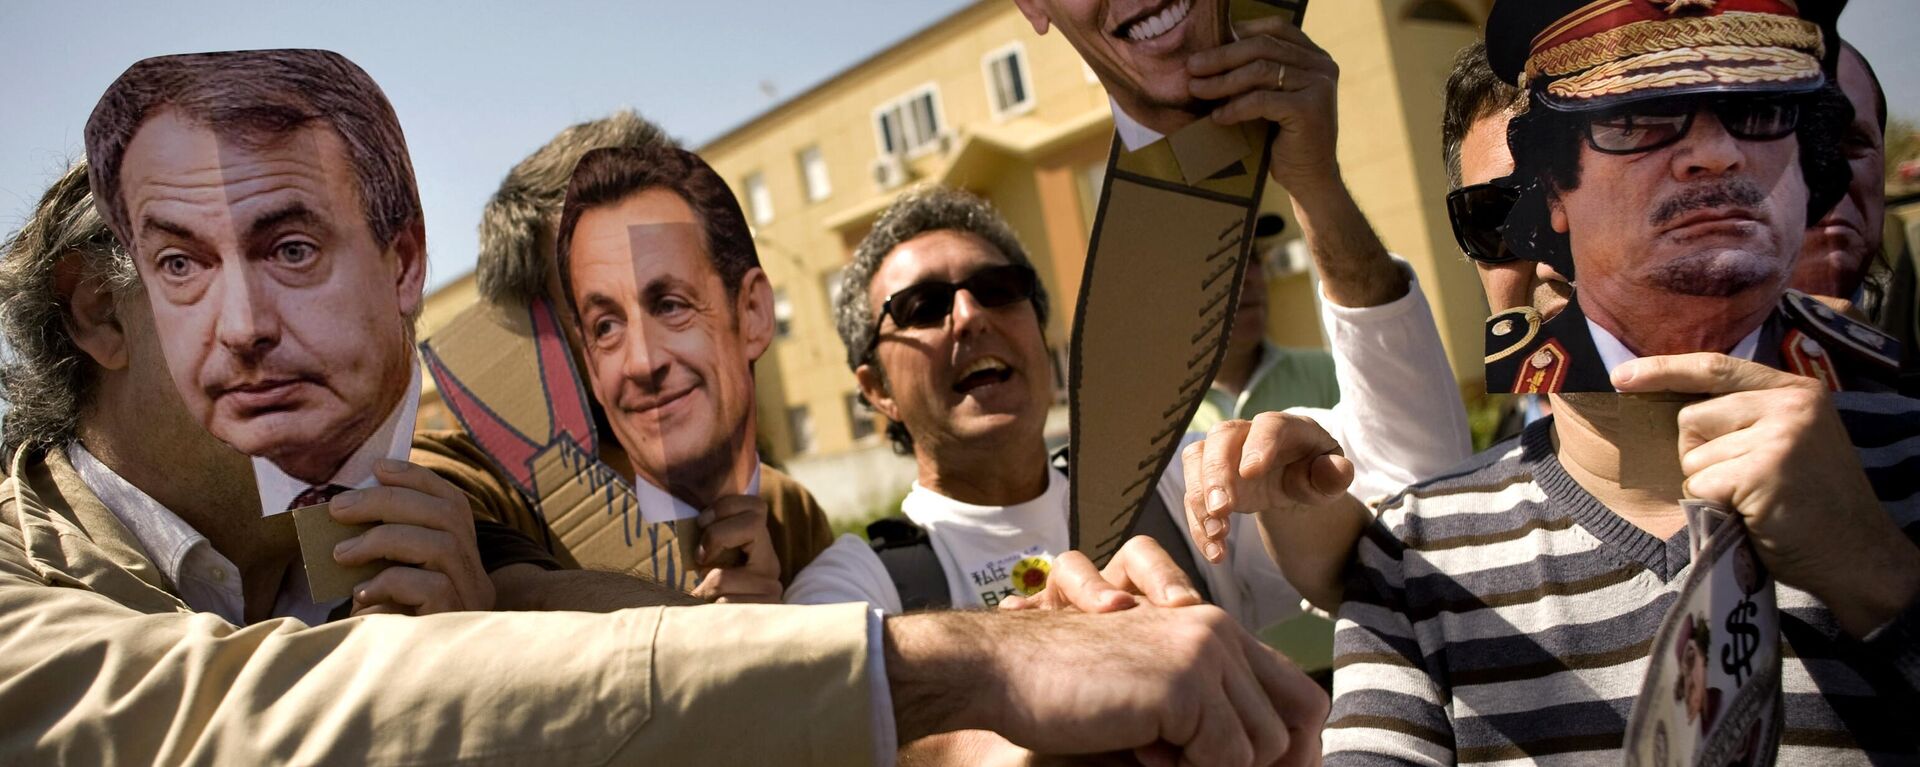 Protesters wearing masks featuring (L-R) Spanish Prime Minister Jose Luis Rodriguez Zapatero, French President Nicolas Sarkozy, US President Barack Obama, Libyan leader Moamer Kadhafi take part in an anti-war demonstration calling on  governments to stop bombing Libya in front of the Base Naval de Rota, on March 26, 2011, in Rota near Cadiz. - Sputnik International, 1920, 15.02.2023